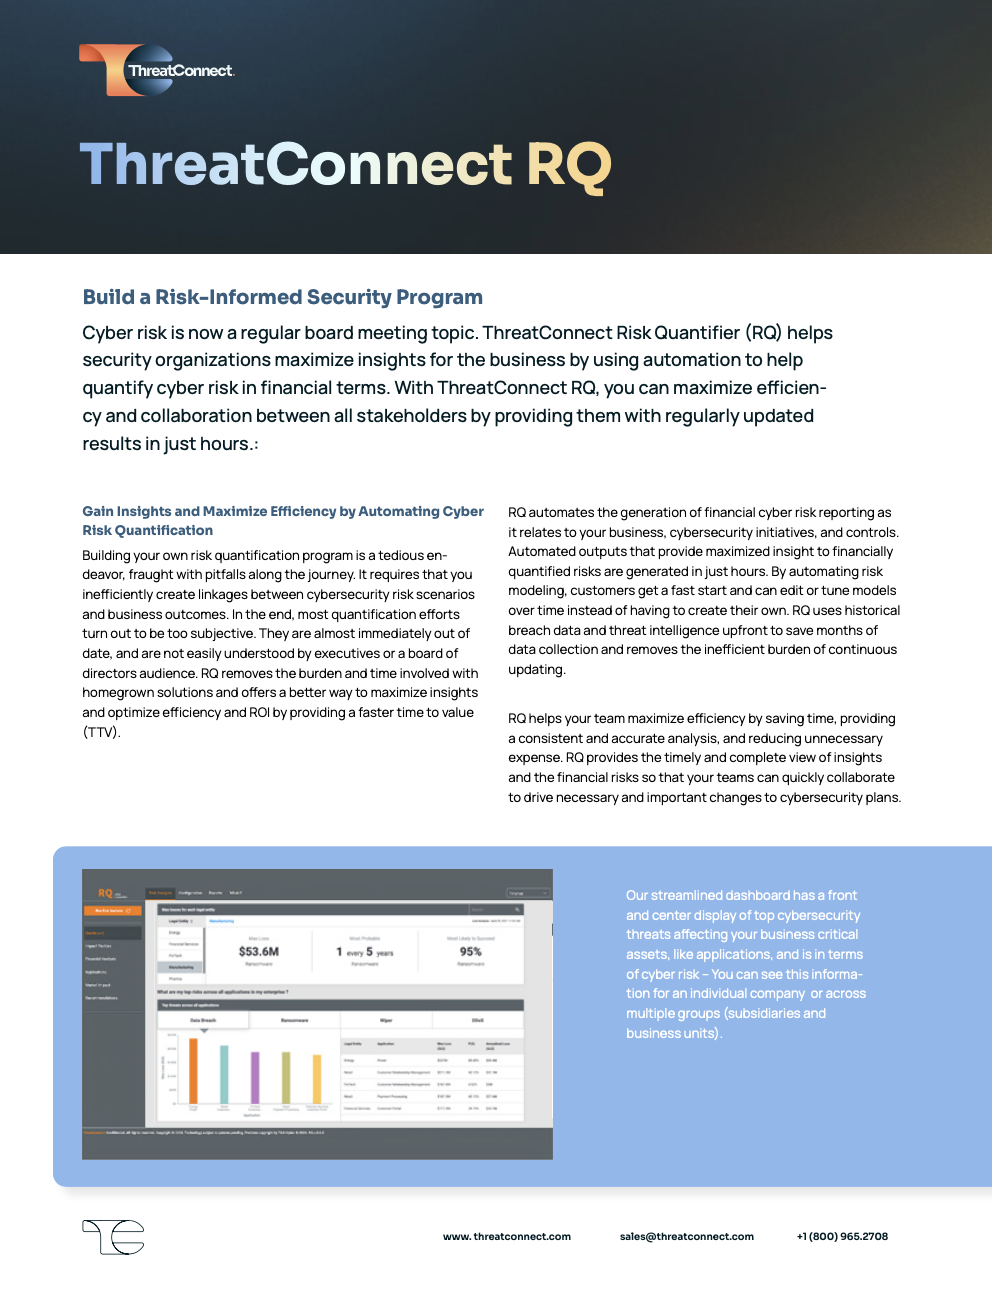 a flyer for ThreatConnect RQ which is a risk-informed security program